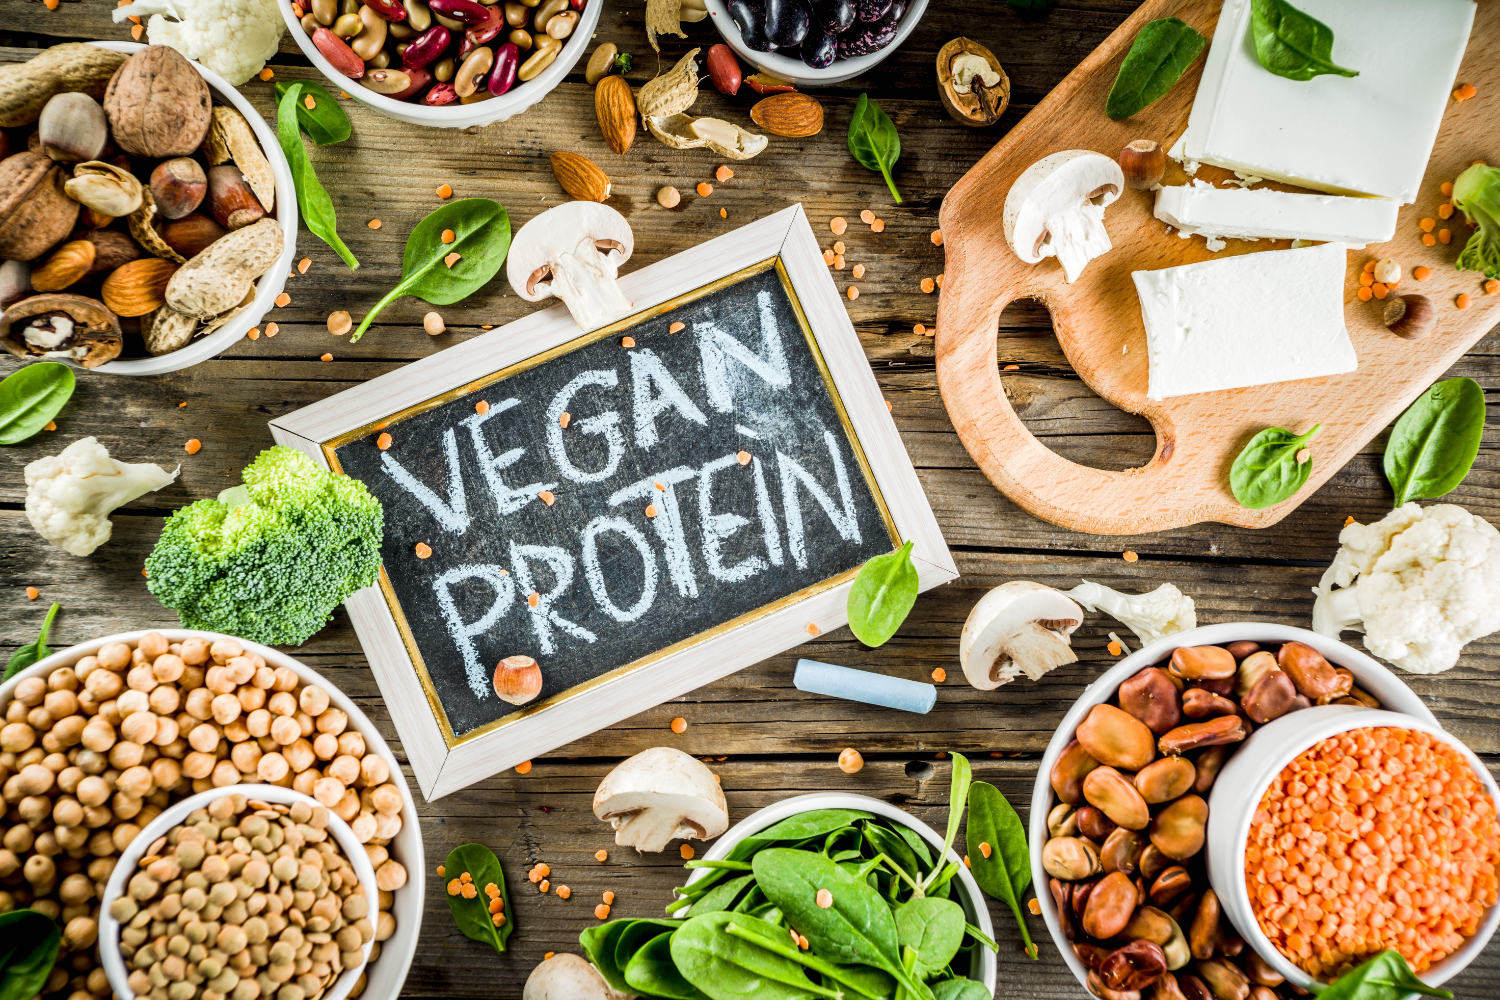 Best Vegan Protein Sources for Muscle Building